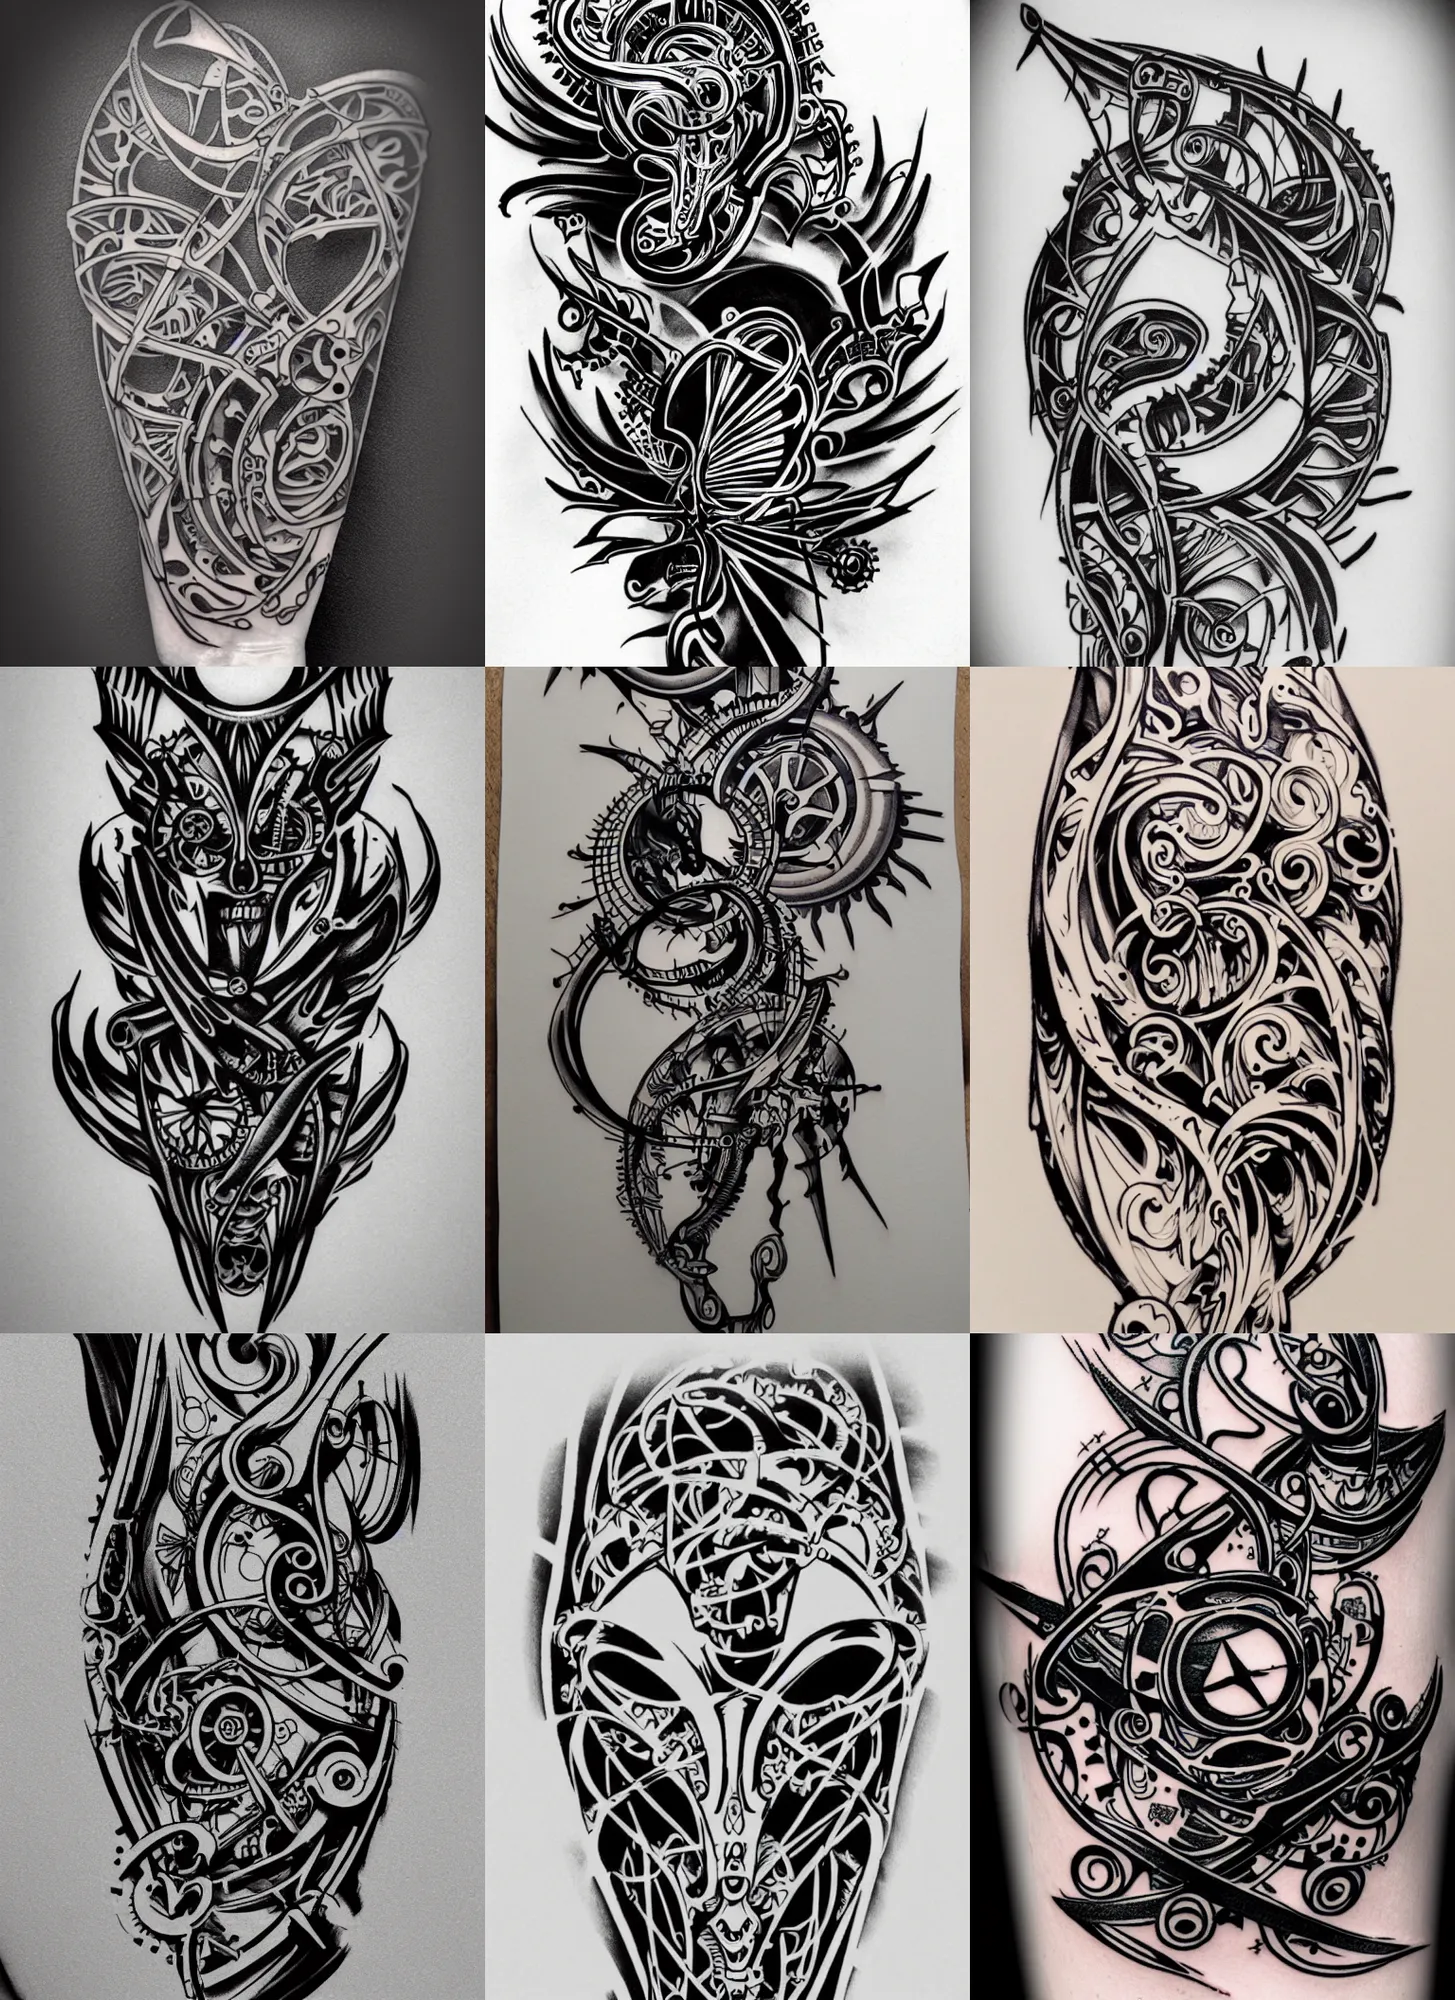 Tattoo Vector Designs Sketch. Designer Isolated Element For Ideas  Decorating The Body Of Women, Men And Girls Arm, Leg And Other Body Parts.  Abstract Illustration. Royalty Free SVG, Cliparts, Vectors, and Stock